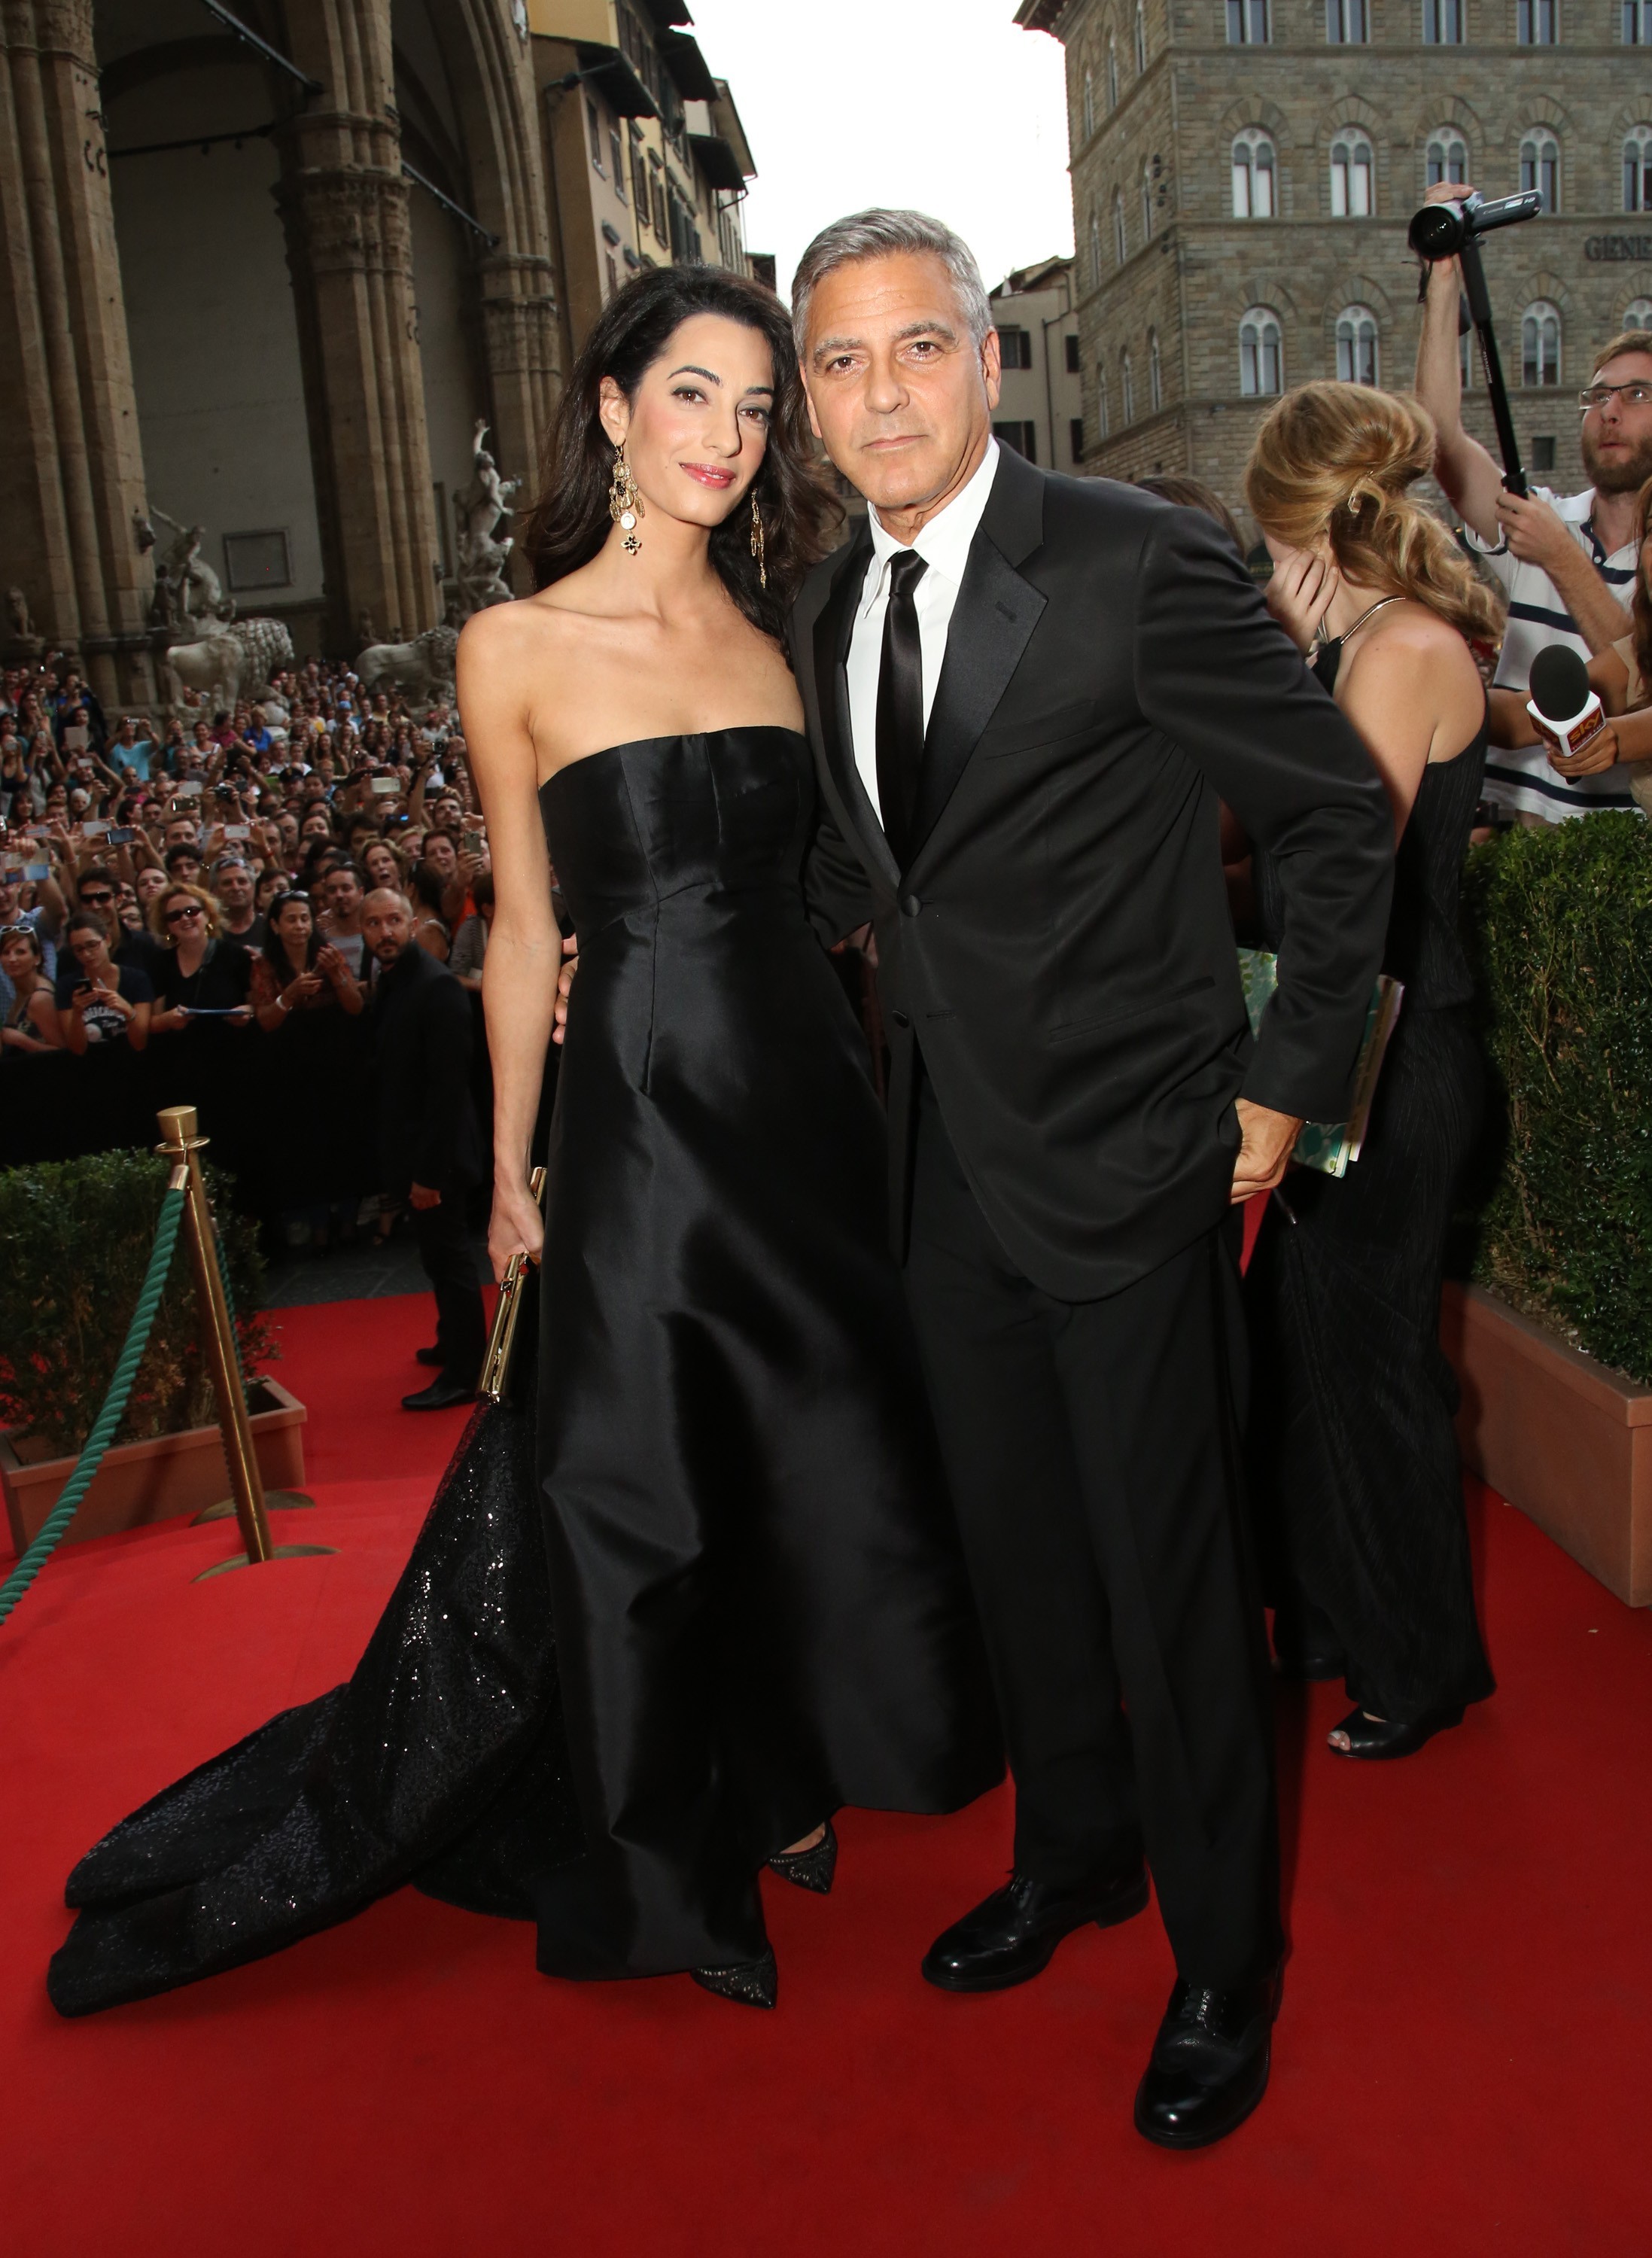 <p>Sparks flew when <a href="https://www.wonderwall.com/celebrity/profiles/overview/george-clooney-283.article">George Clooney</a> met British barrister Amal Alamuddin for the first time in July 2013 -- and his parents were there to witness it all. "We met in Lake Como. She was a friend of a friend who came to visit and then I chased her for many months, calling and writing, those kinds of things," George told David Letterman in 2015. George's father, journalist Nick Clooney, recounted that magical night when Amal and George were introduced at a dinner gathering the actor was hosting at his home. "[George's mom] Nina and I were actually the ones who answered the door when Amal came in," Nick told People in June 2017. "She introduced herself to us and we talked. She was obviously very charming, gorgeous and so clearly accomplished, but by the time we had supper that night, it was clear there was a kindness to her and an inclusiveness." By the time the dinner was over, "his and her fates were sealed, both of them. She was so remarkable and he was so remarkable around her," Nick added. "This young woman meant something to him almost immediately. It was just amazing." As Nick got to know Amal, things crystallized further. "It was just different than all the other relationships I had seen him in, and I had watched them all from the time he was 13," Nick said. Just one year later in September 2014, they married in Venice, Italy, and the bride changed her name to <a href="https://www.wonderwall.com/celebrity/profiles/overview/amal-clooney-1566.article">Amal Clooney</a>.</p>